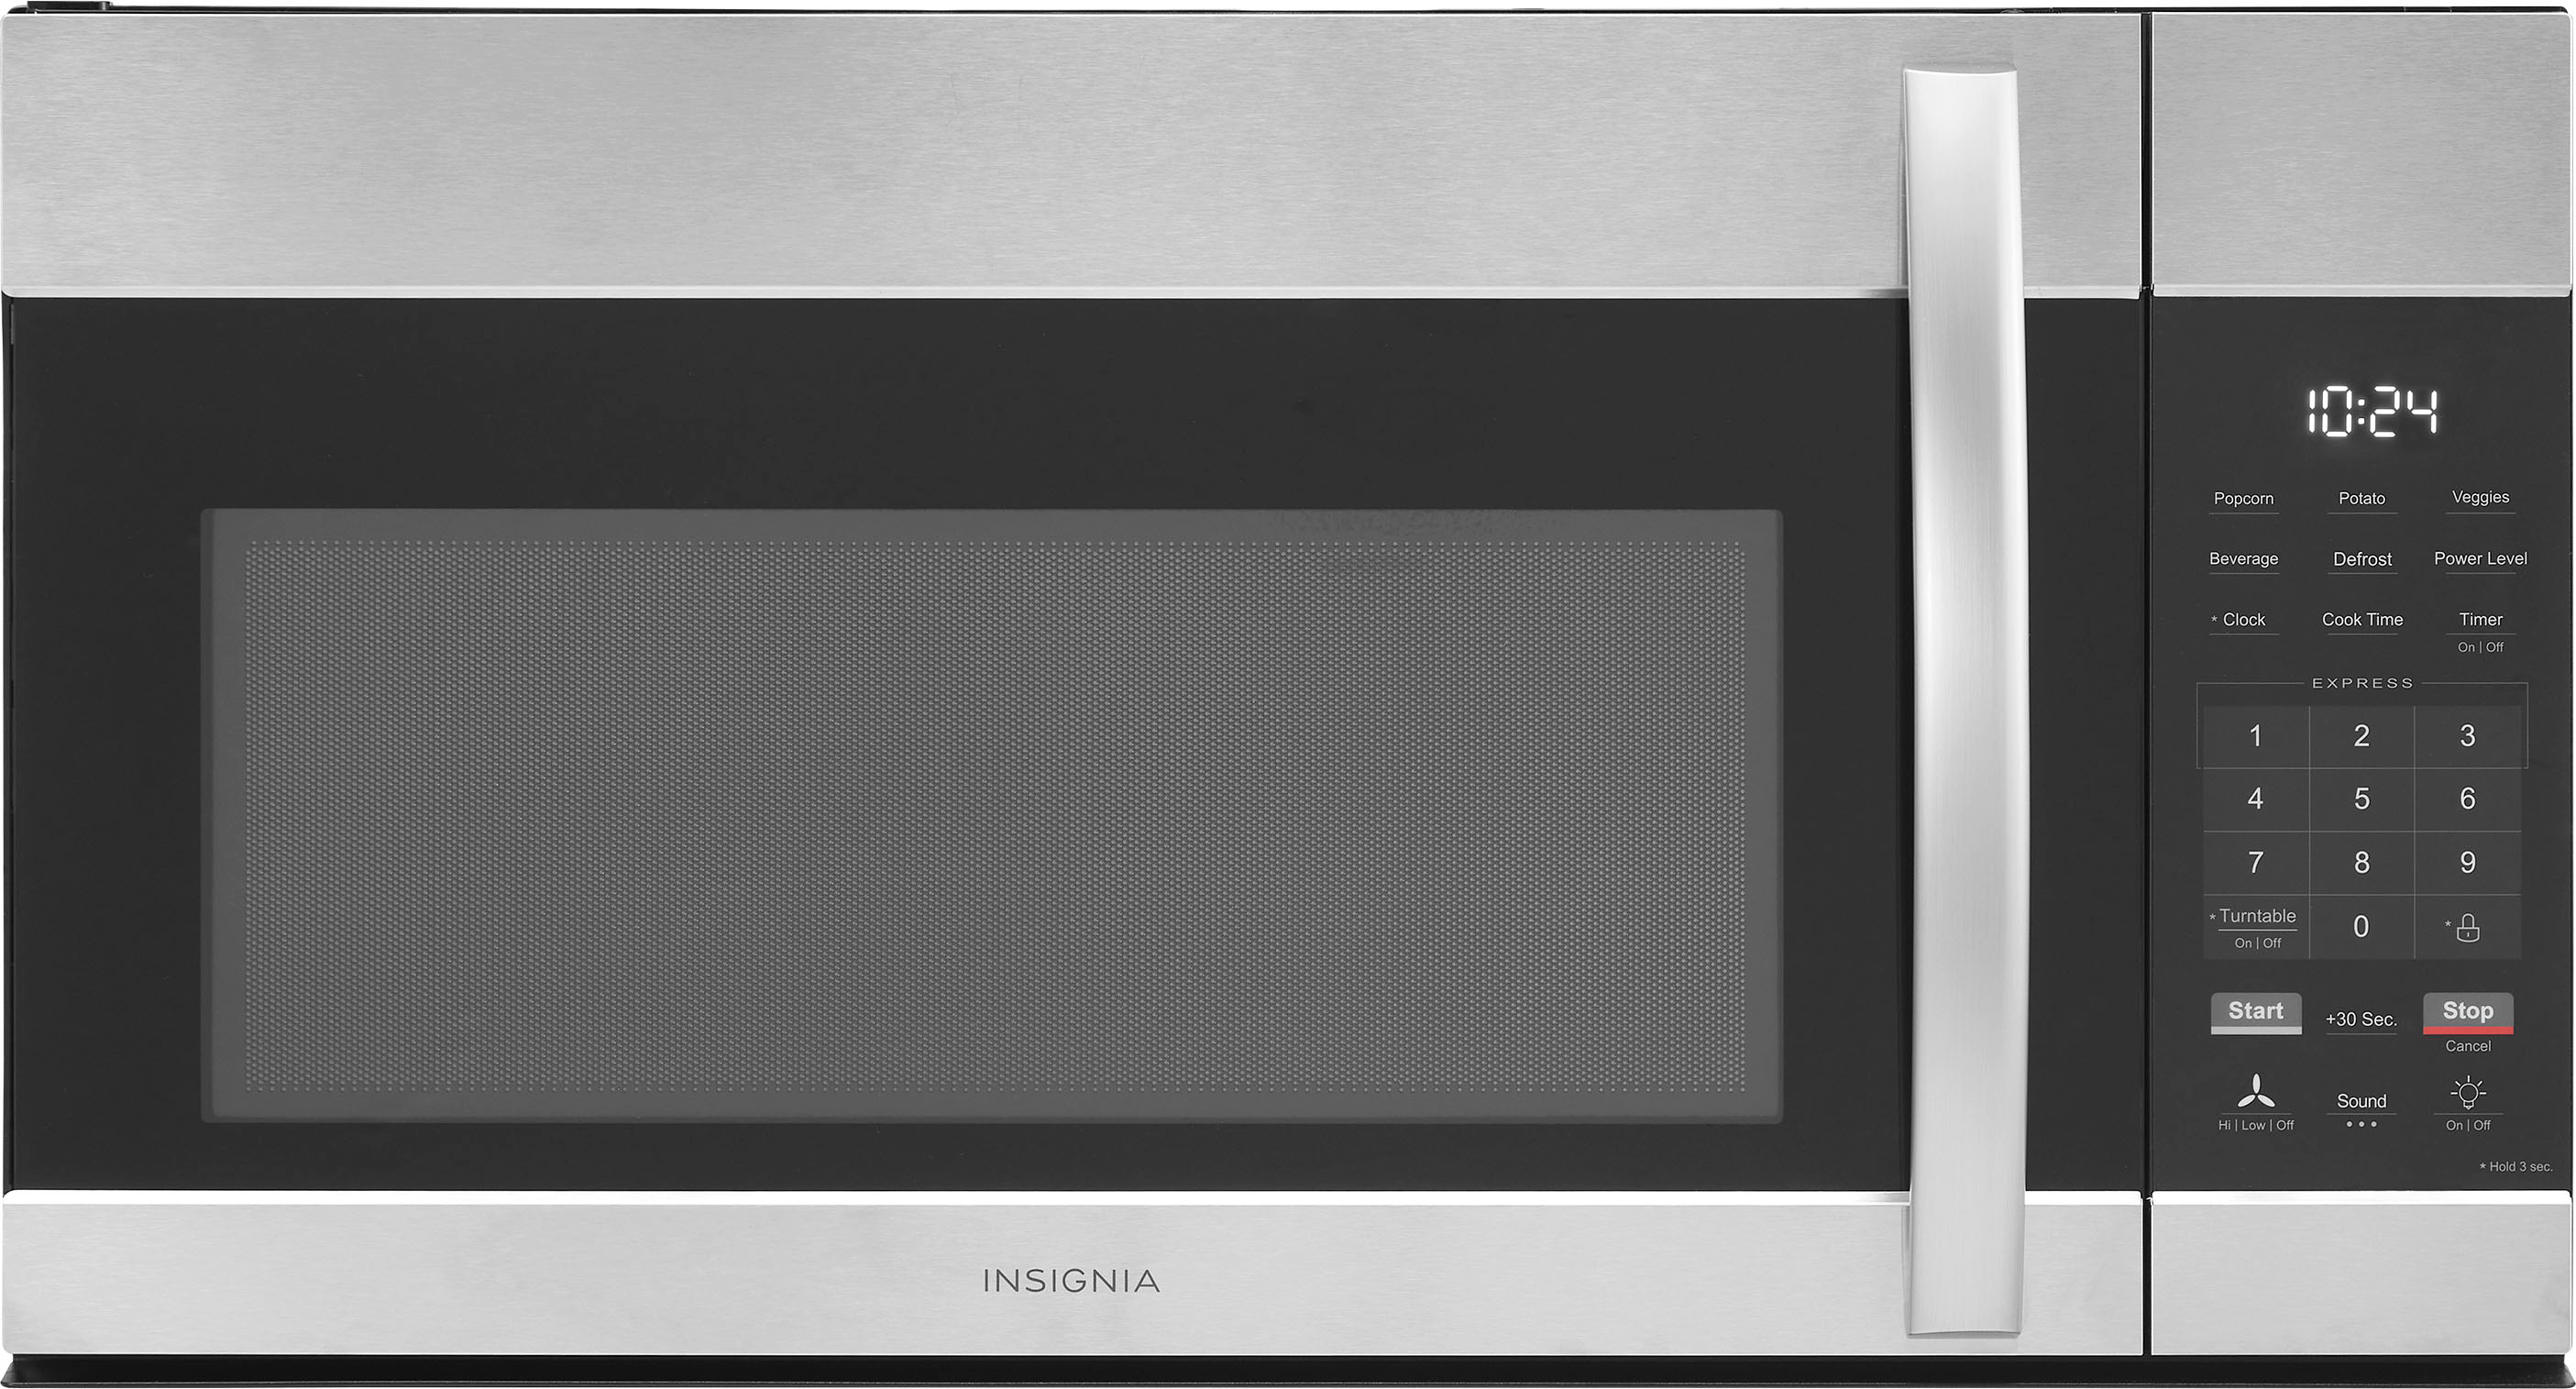  COMMERCIAL CHEF 1.6 Cubic Foot Microwave with 10 Power Levels,  Small Microwave with Push Button, 1000 Watt Microwave with Digital Control  Panels, Countertop Microwave with Timer, White : Home & Kitchen